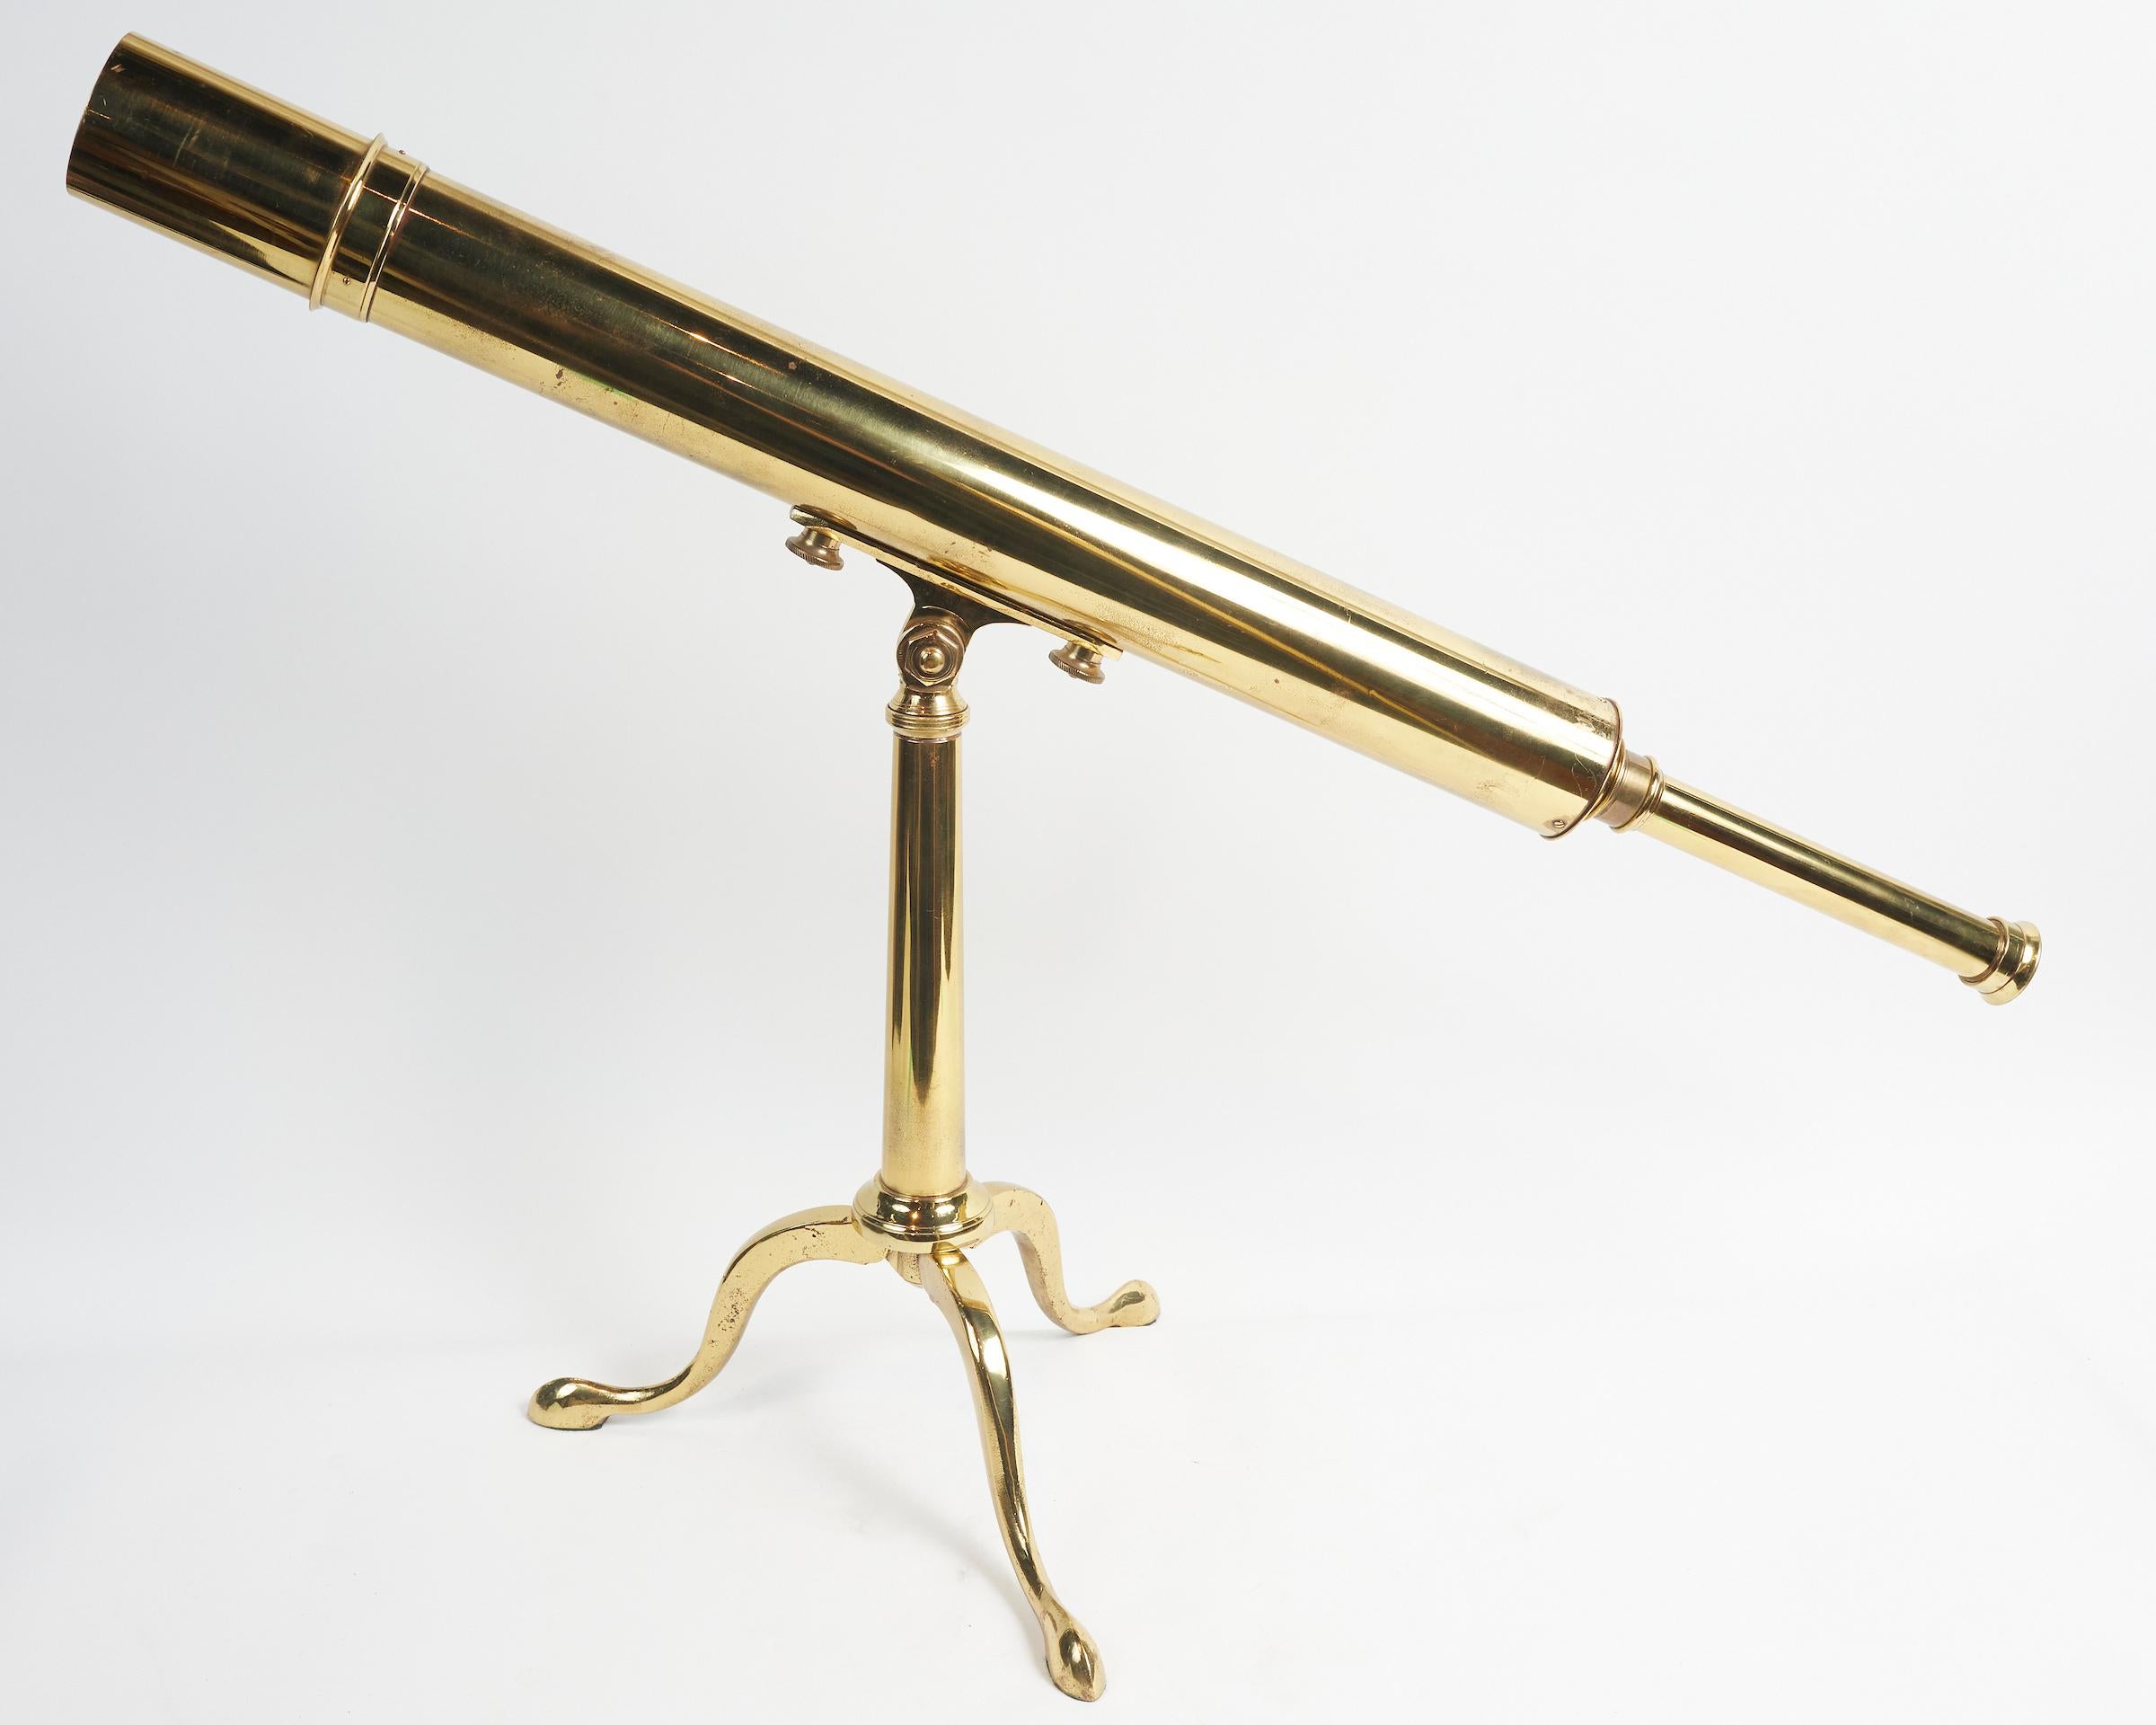 Large Antique Solid Brass Library Telescope  by Broadhurst, Clarkson and Co For Sale 1